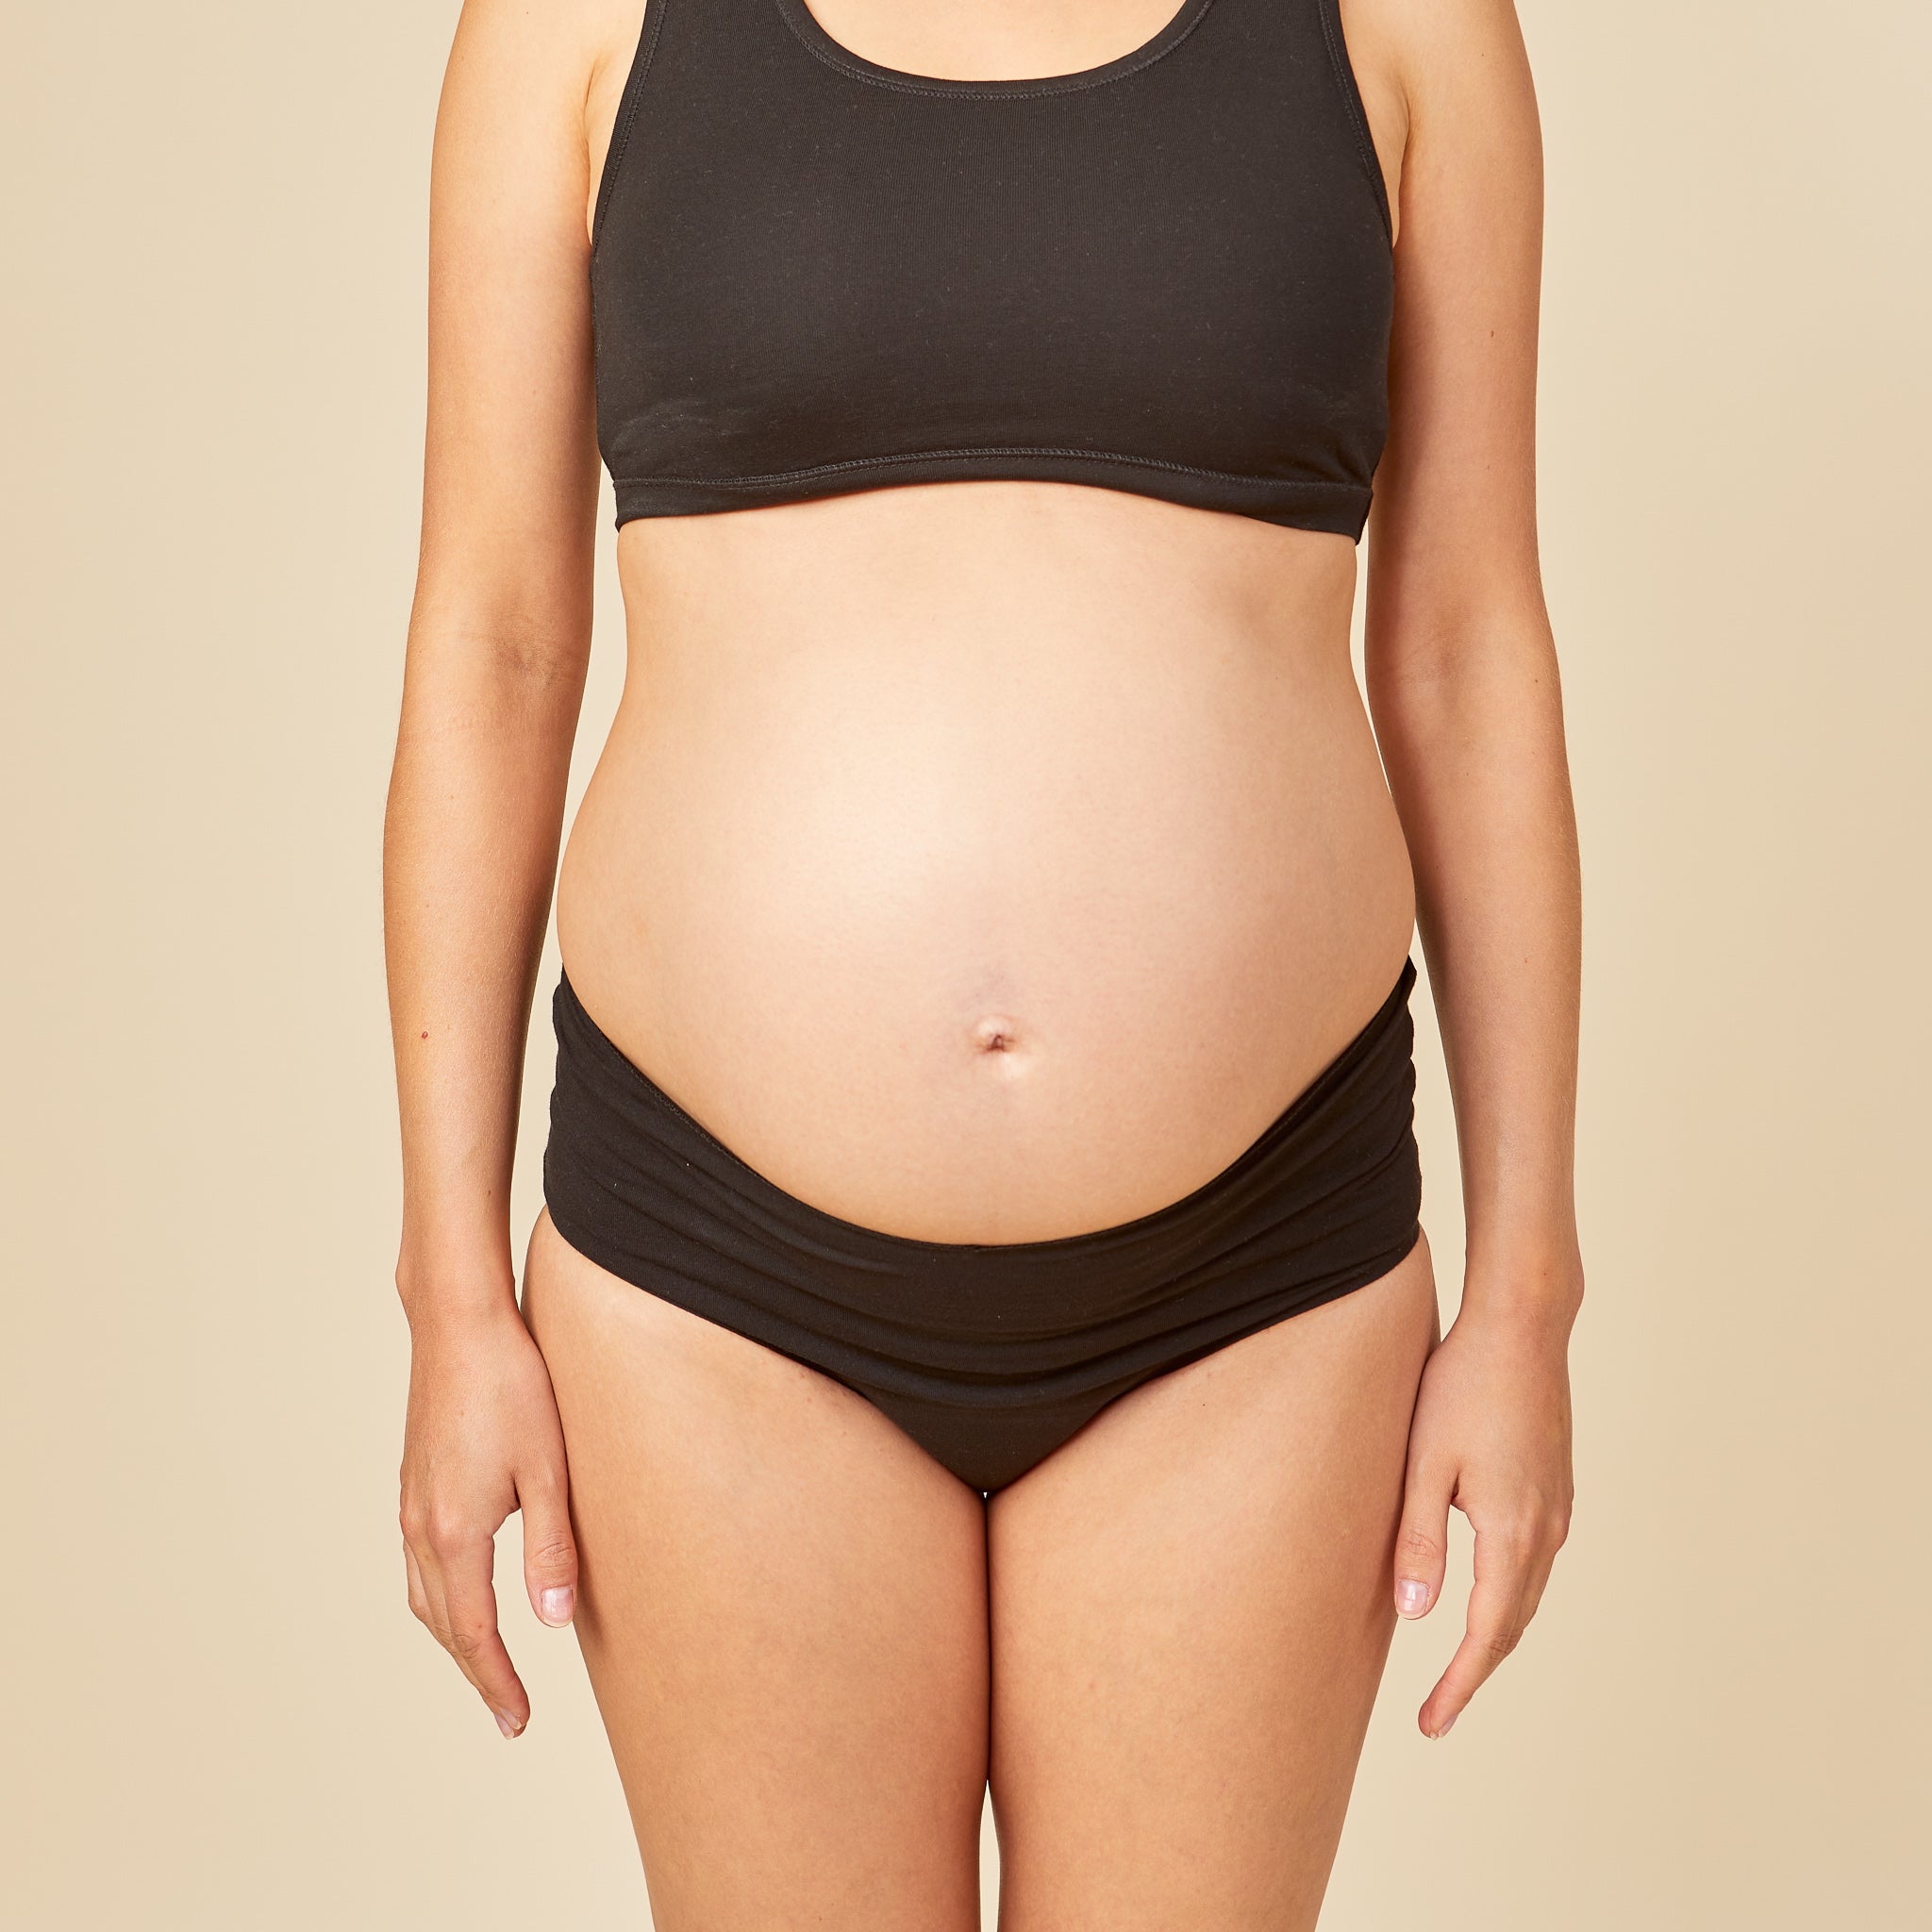 Why is it beneficial to wear a high waisted panty during pregnancy